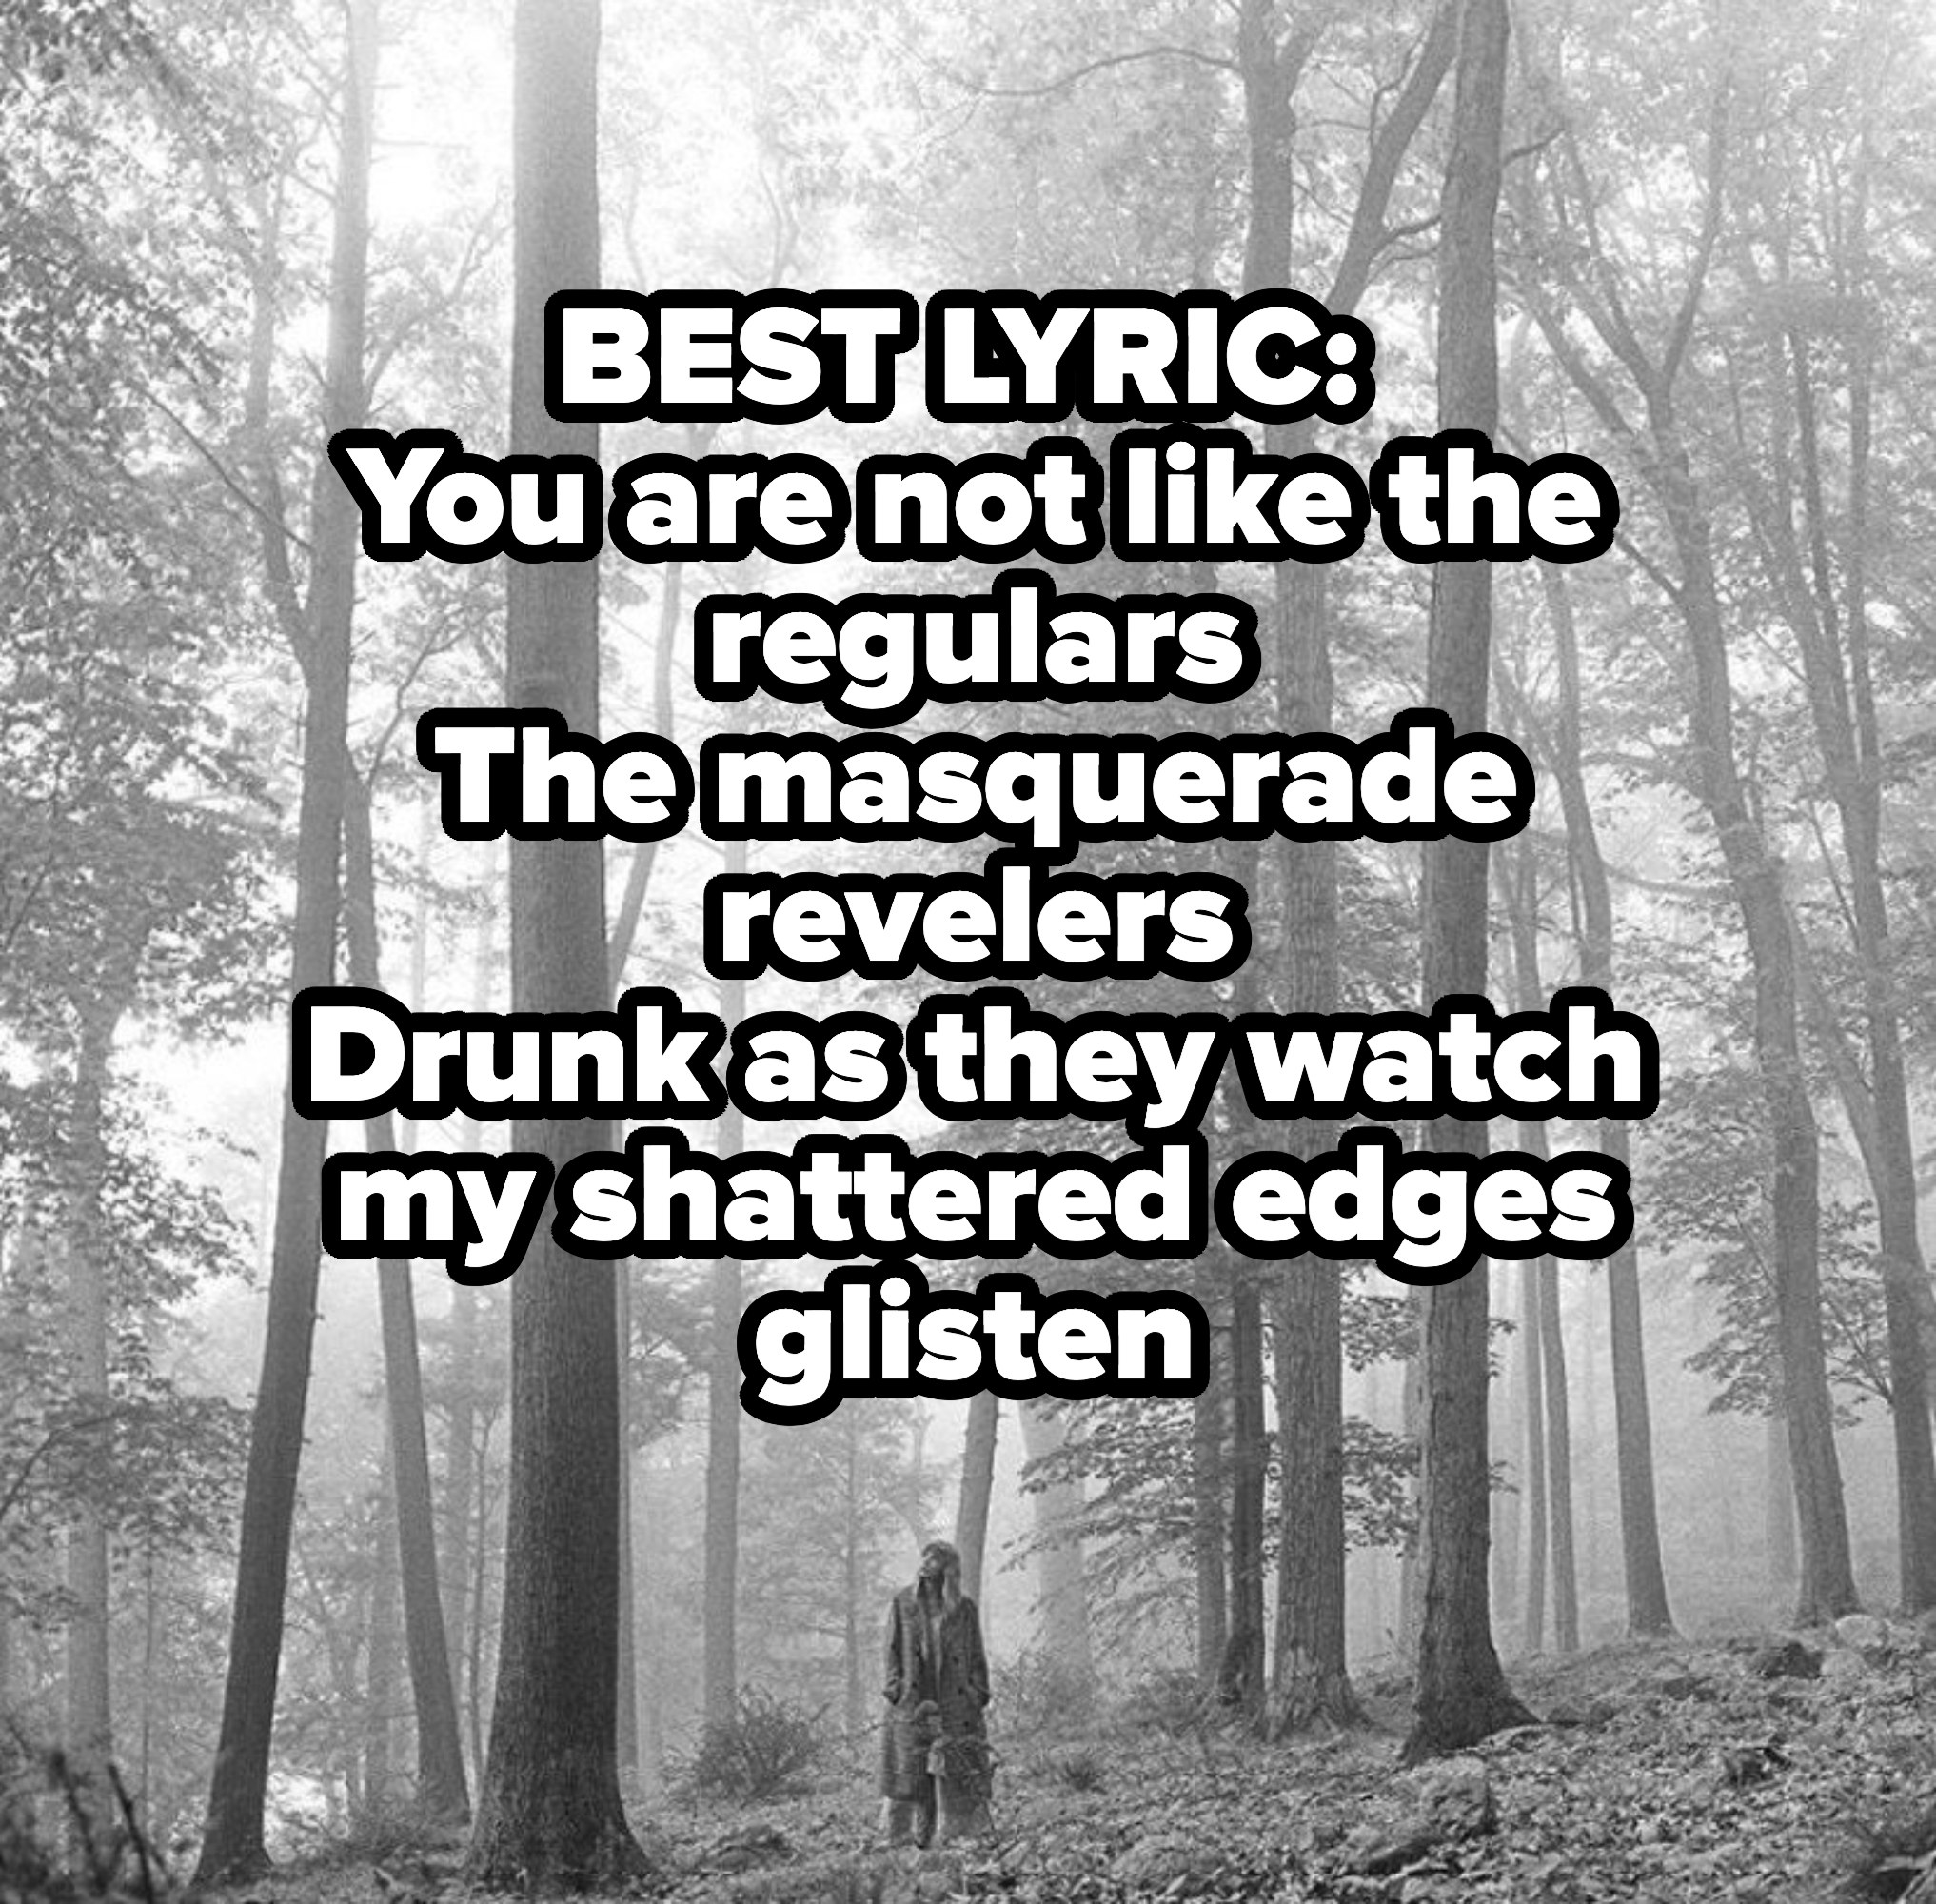 BEST LYRIC: You are not like the regulars
The masquerade revelers
Drunk as they watch my shattered edges glisten